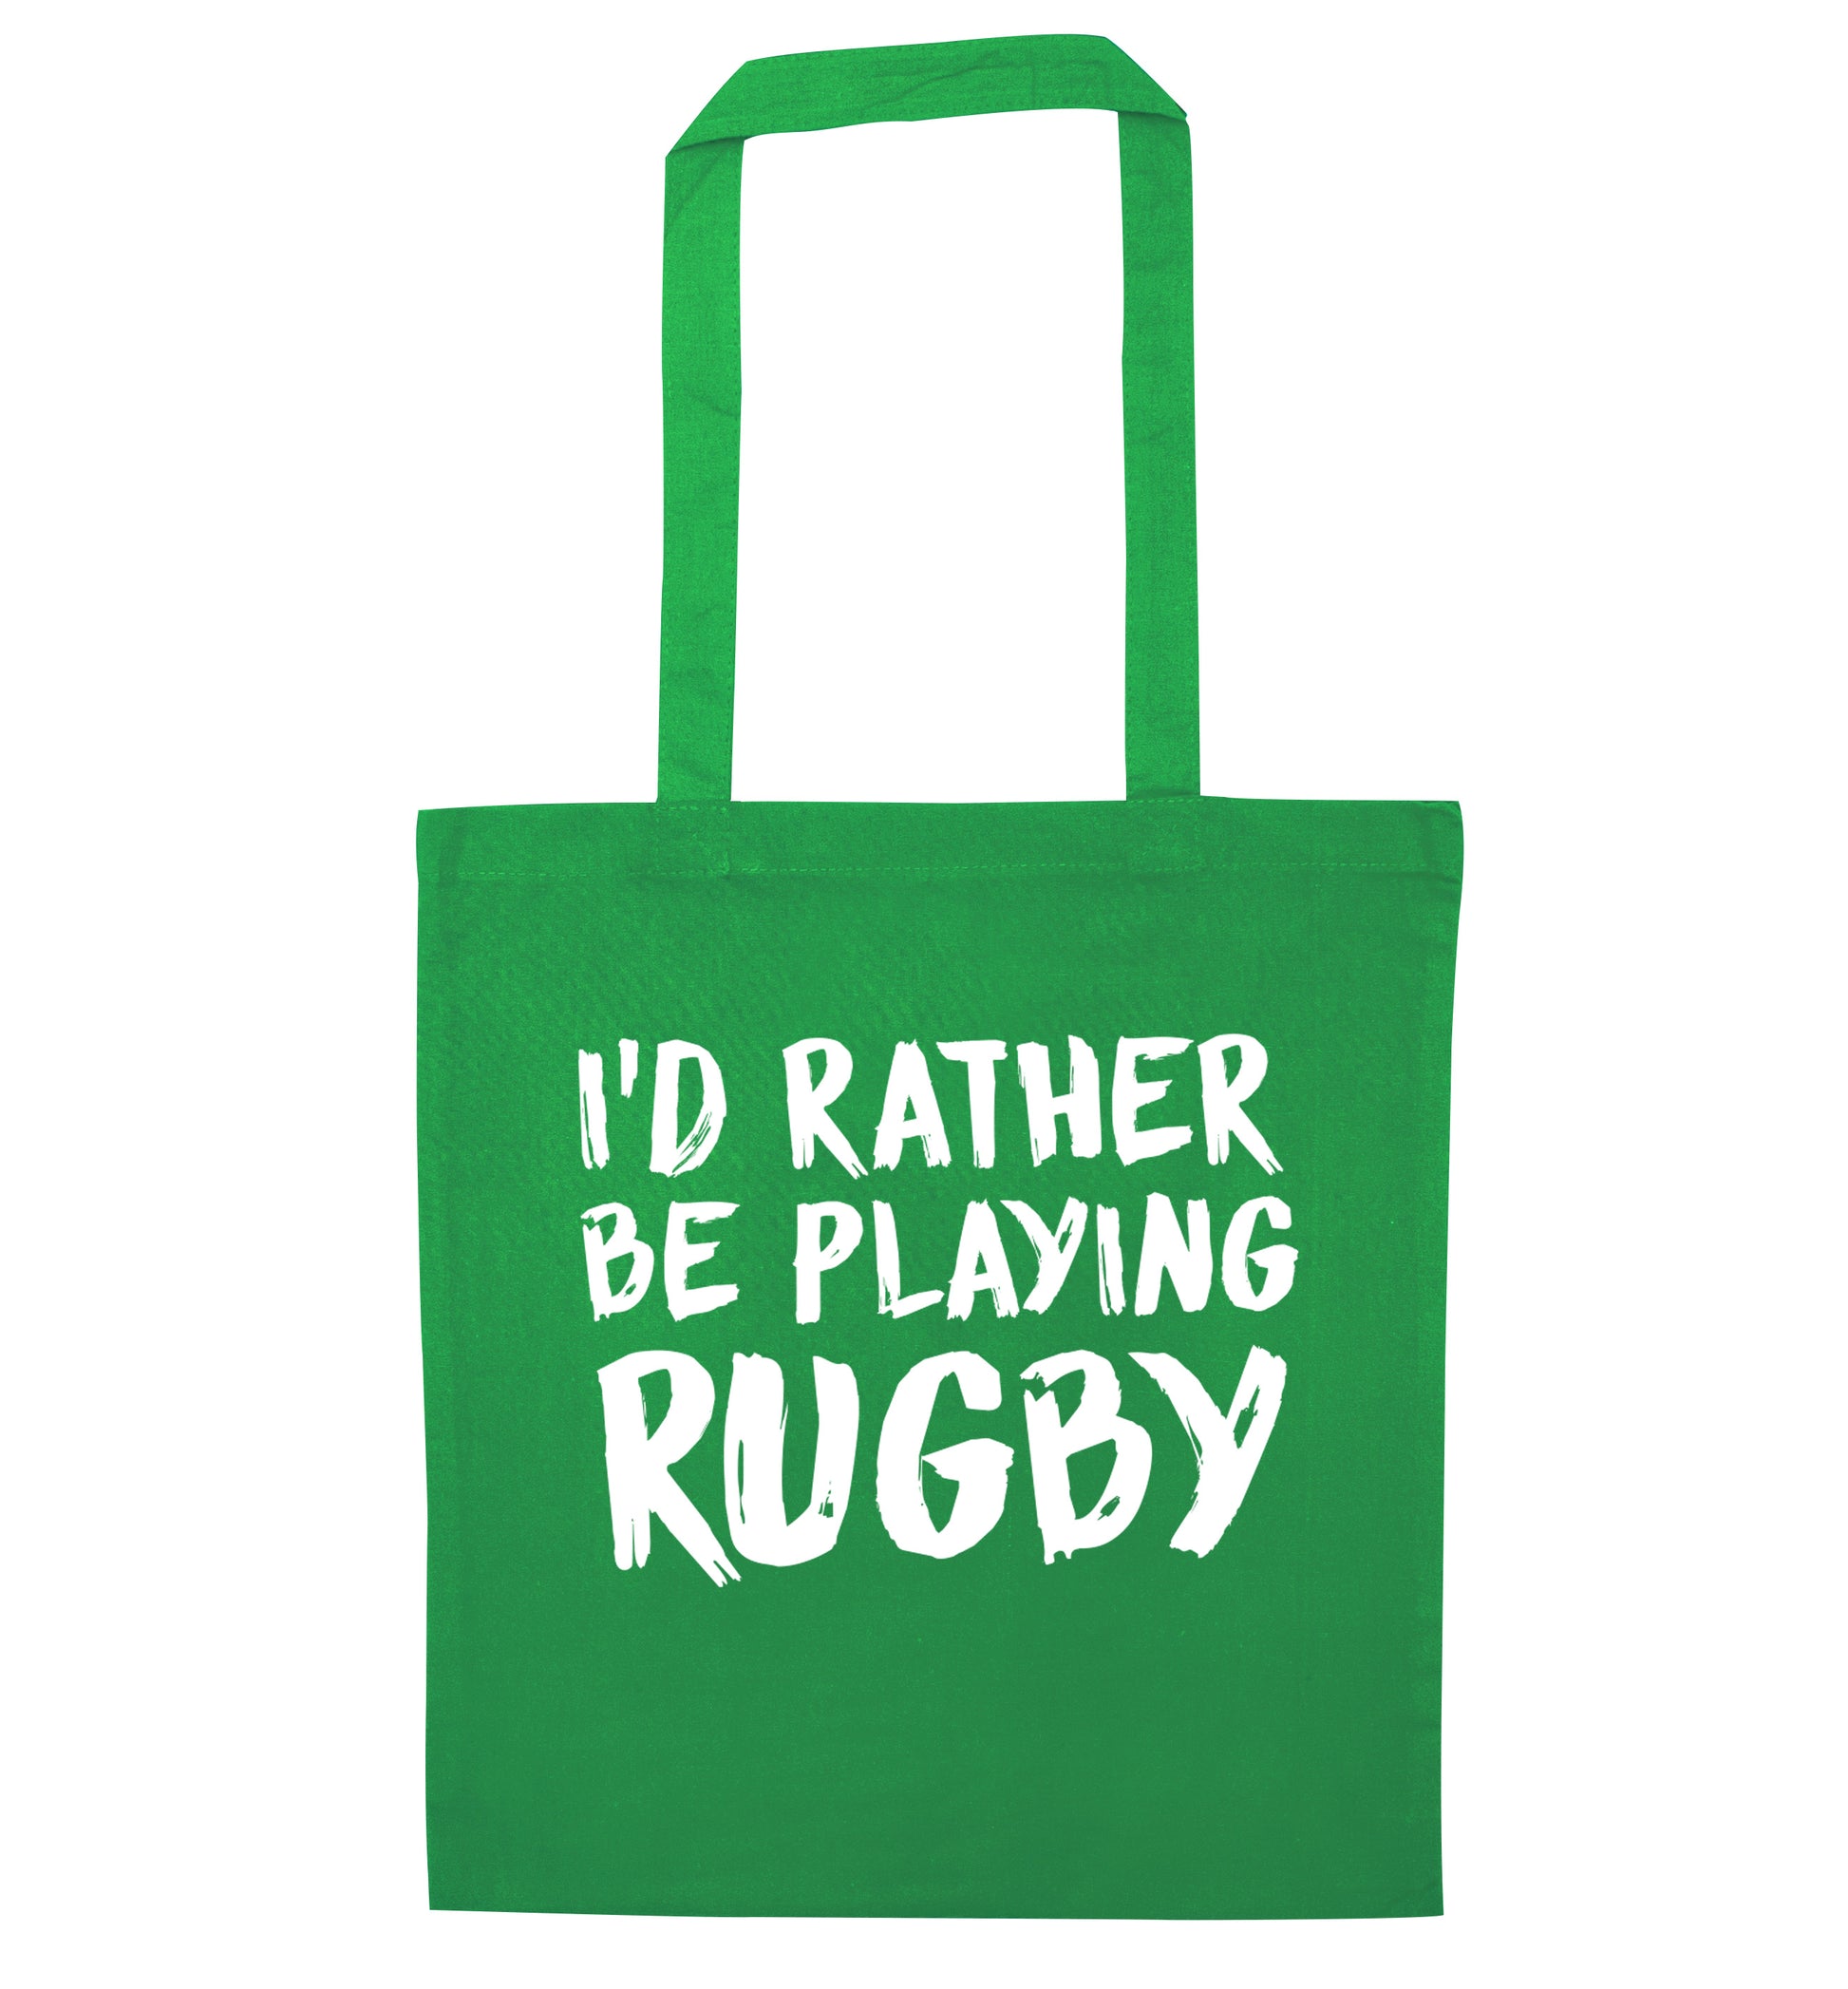 I'd rather be playing rugby green tote bag